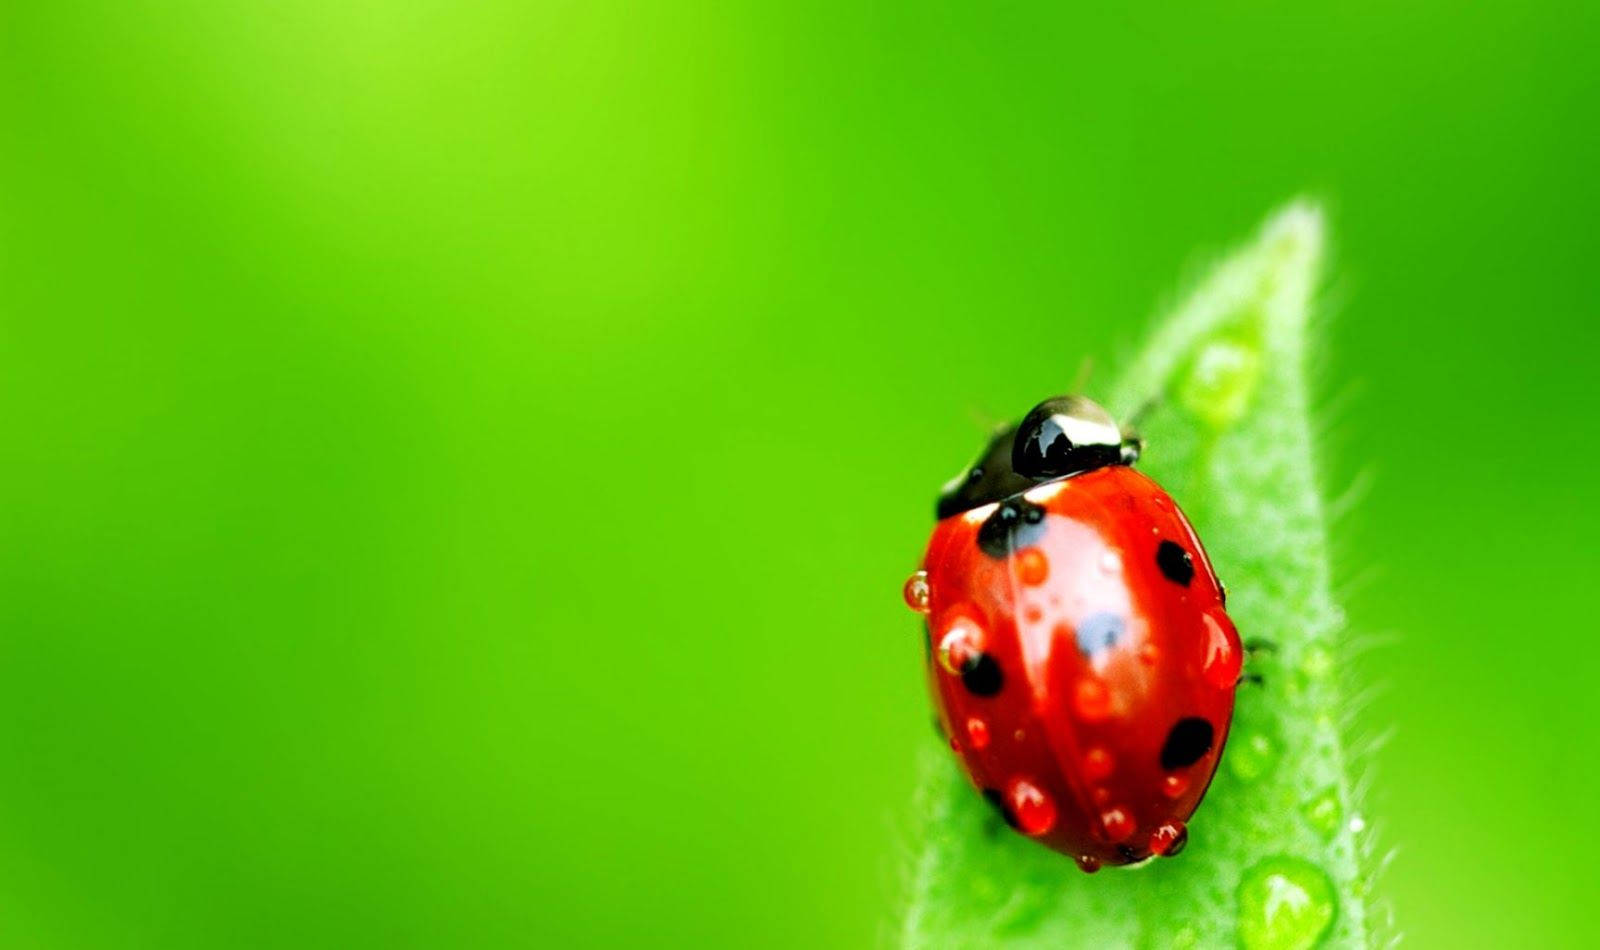 Insect Ladybug With Water Droplets